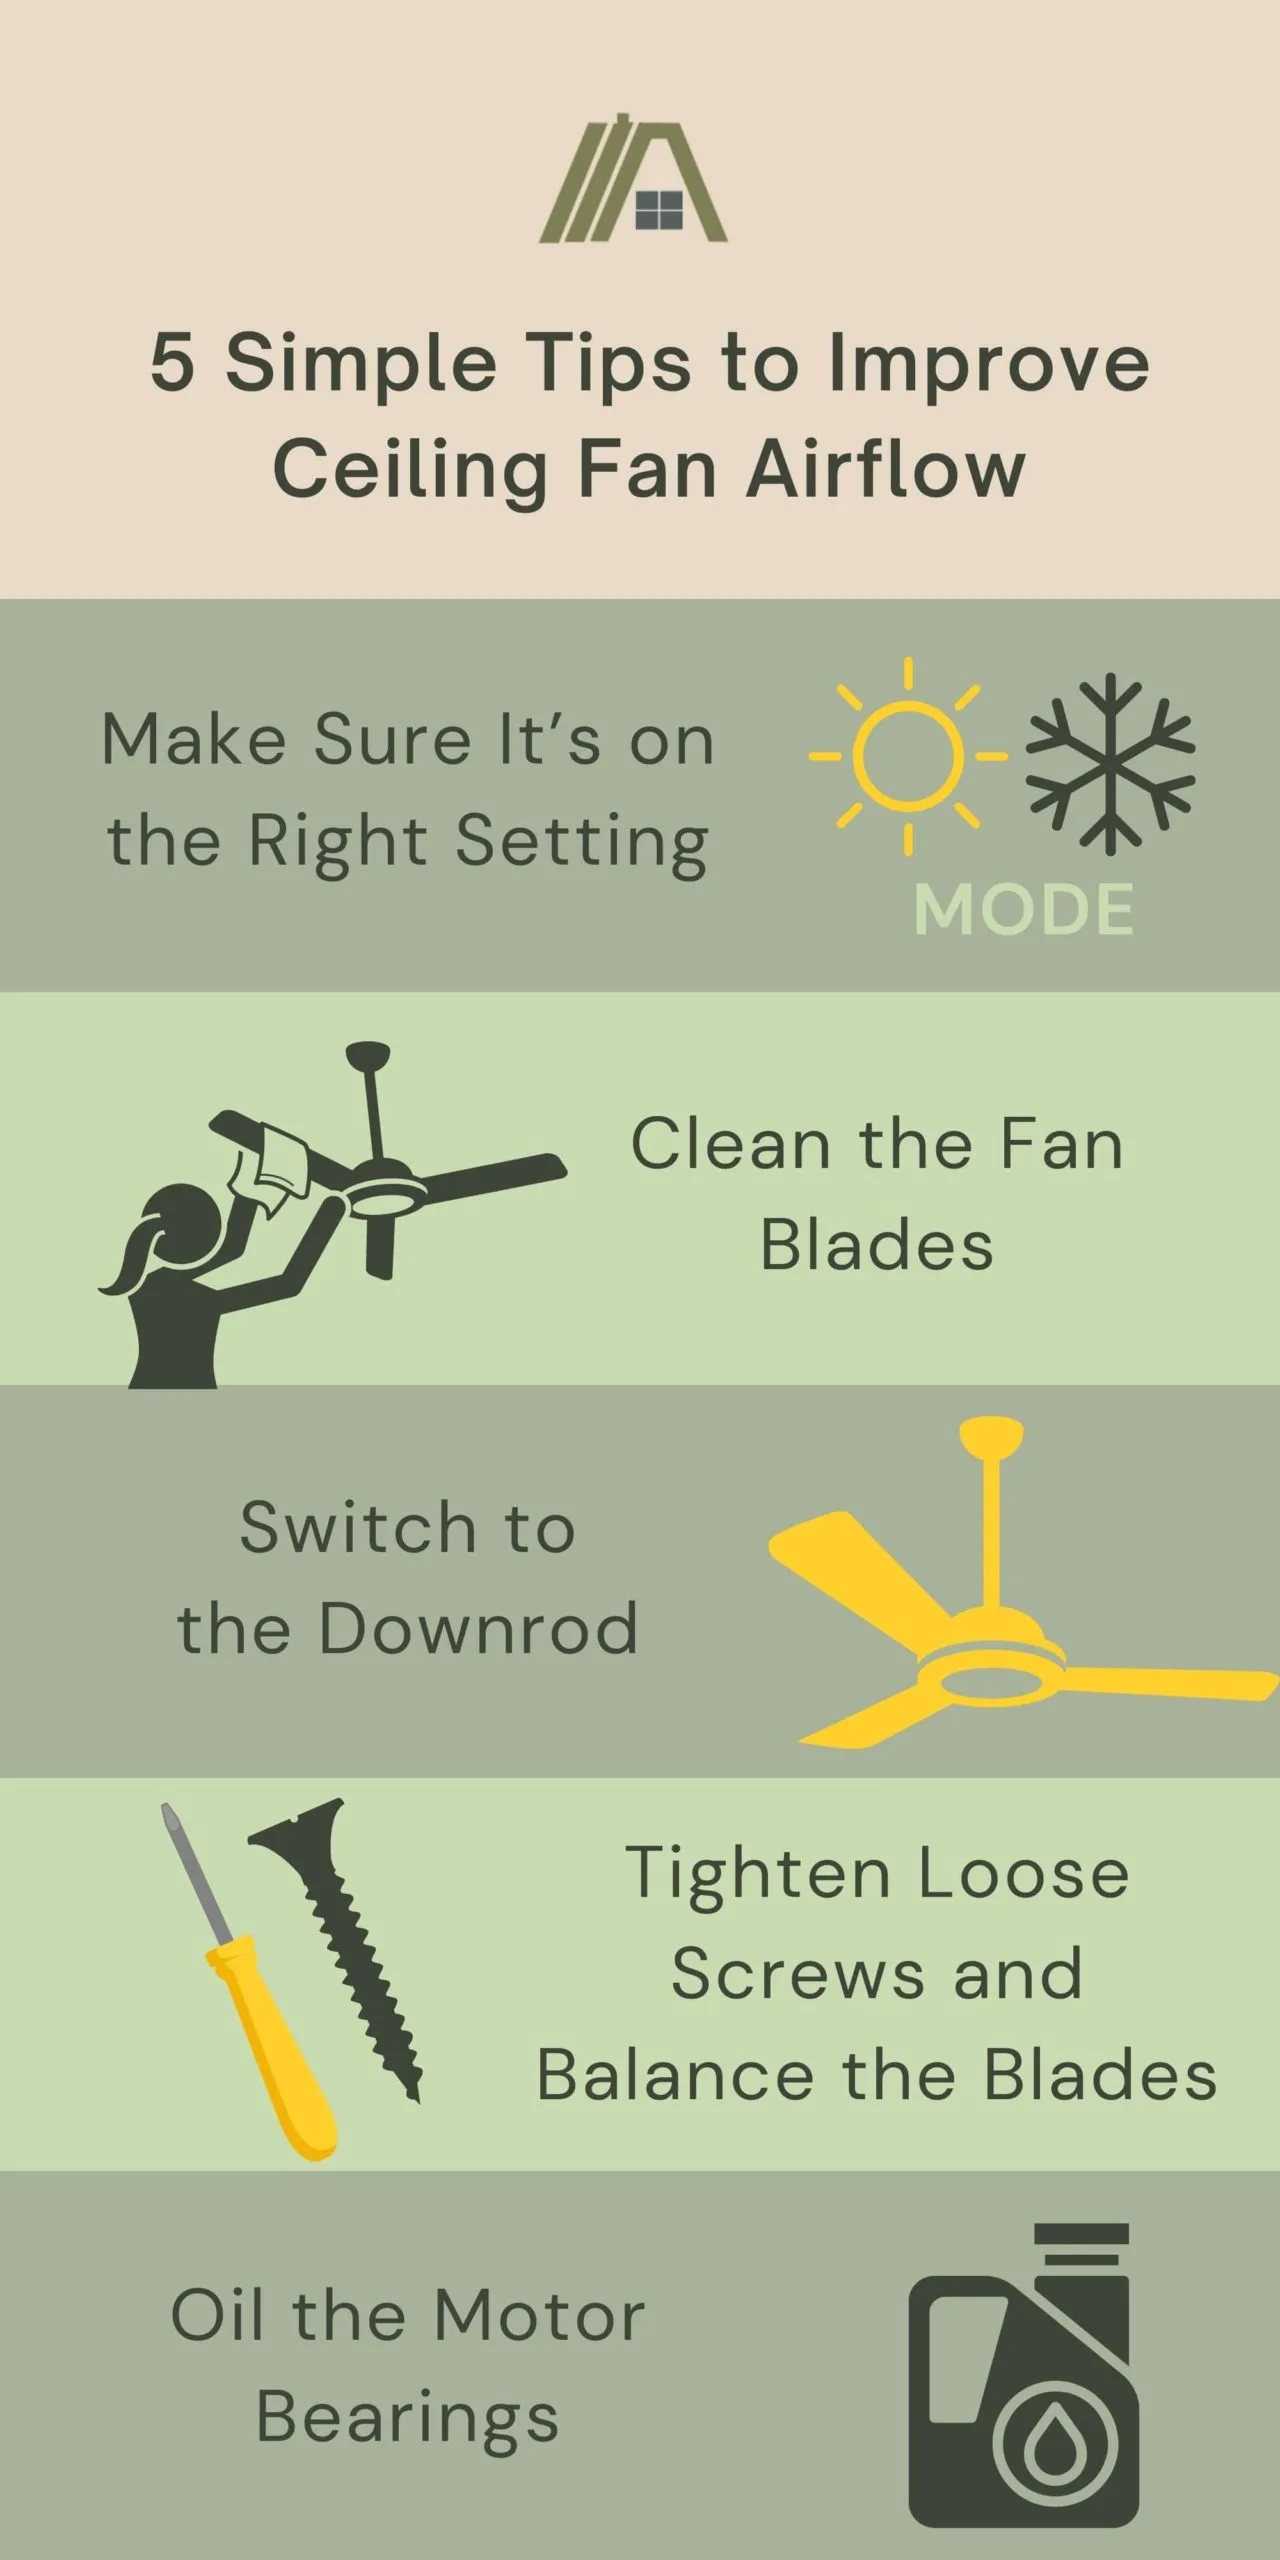 5 Simple Tips to Improve Ceiling Fan Airflow: Make Sure It’s on the Right Setting, Clean the Fan Blades, Switch to the Downrod, Tighten Loose Screws and Balance the Blades and Oil the Motor Bearings